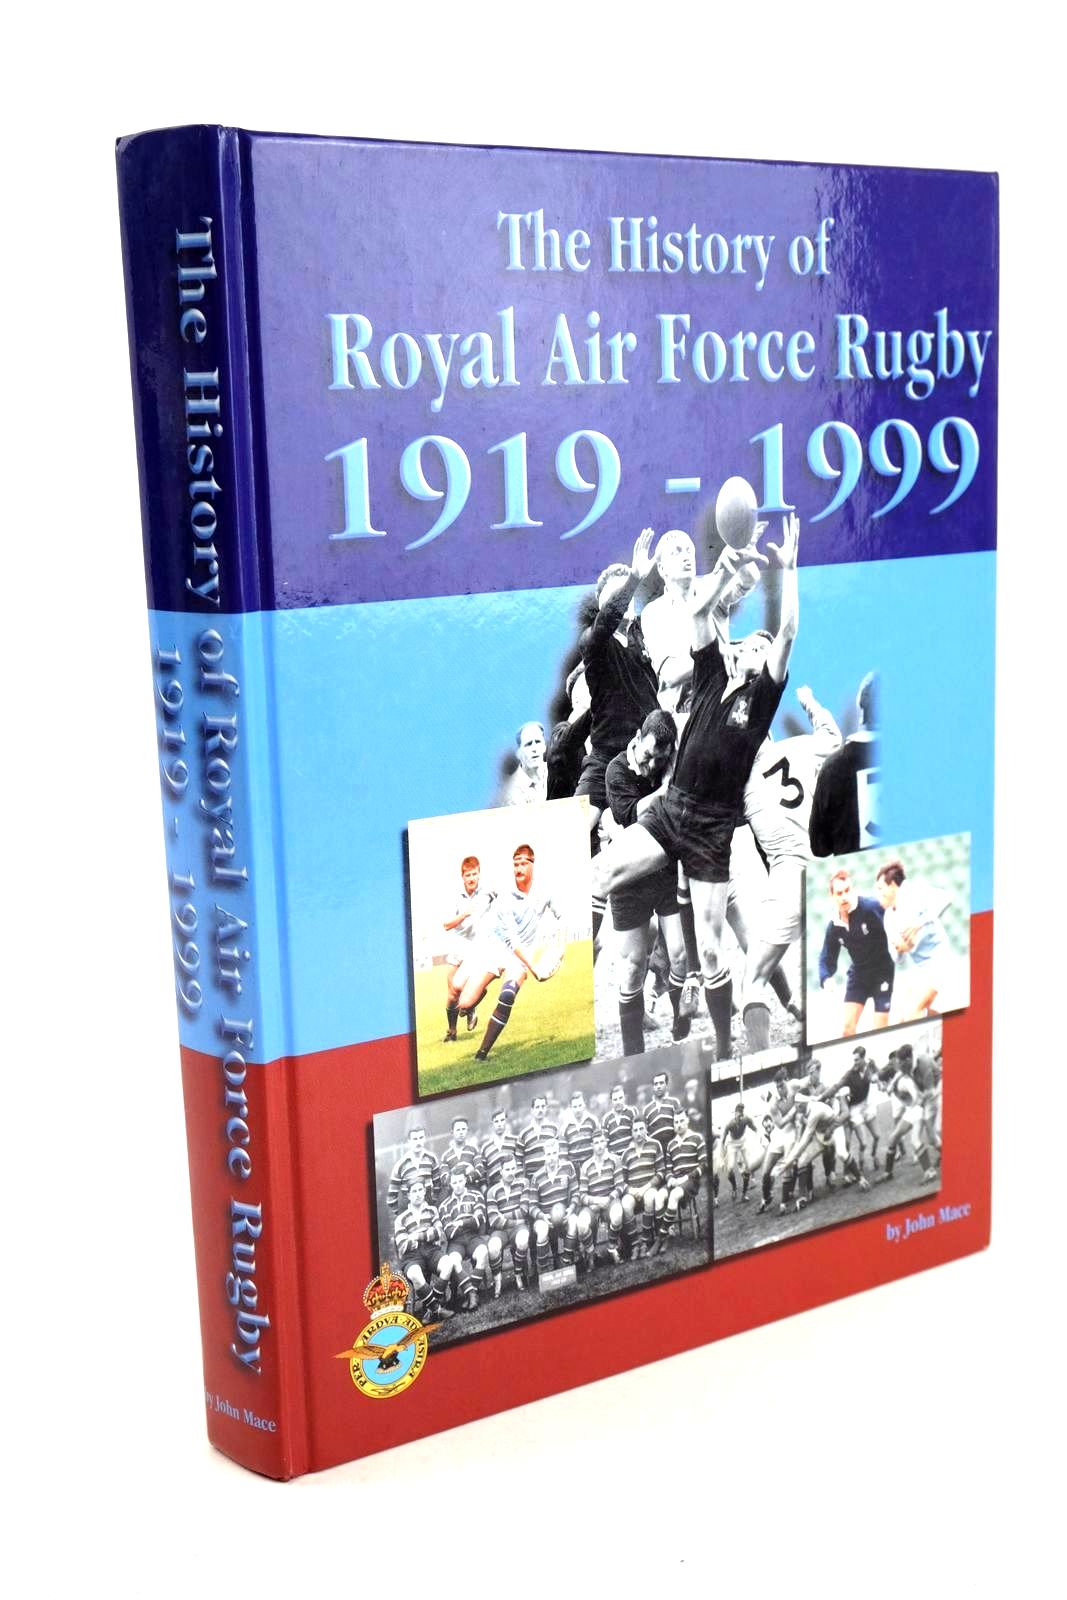 Photo of THE HISTORY OF ROYAL AIR FORCE RUGBY 1919-1999 written by Mace, John published by The Royal Air Force (STOCK CODE: 1327392)  for sale by Stella & Rose's Books